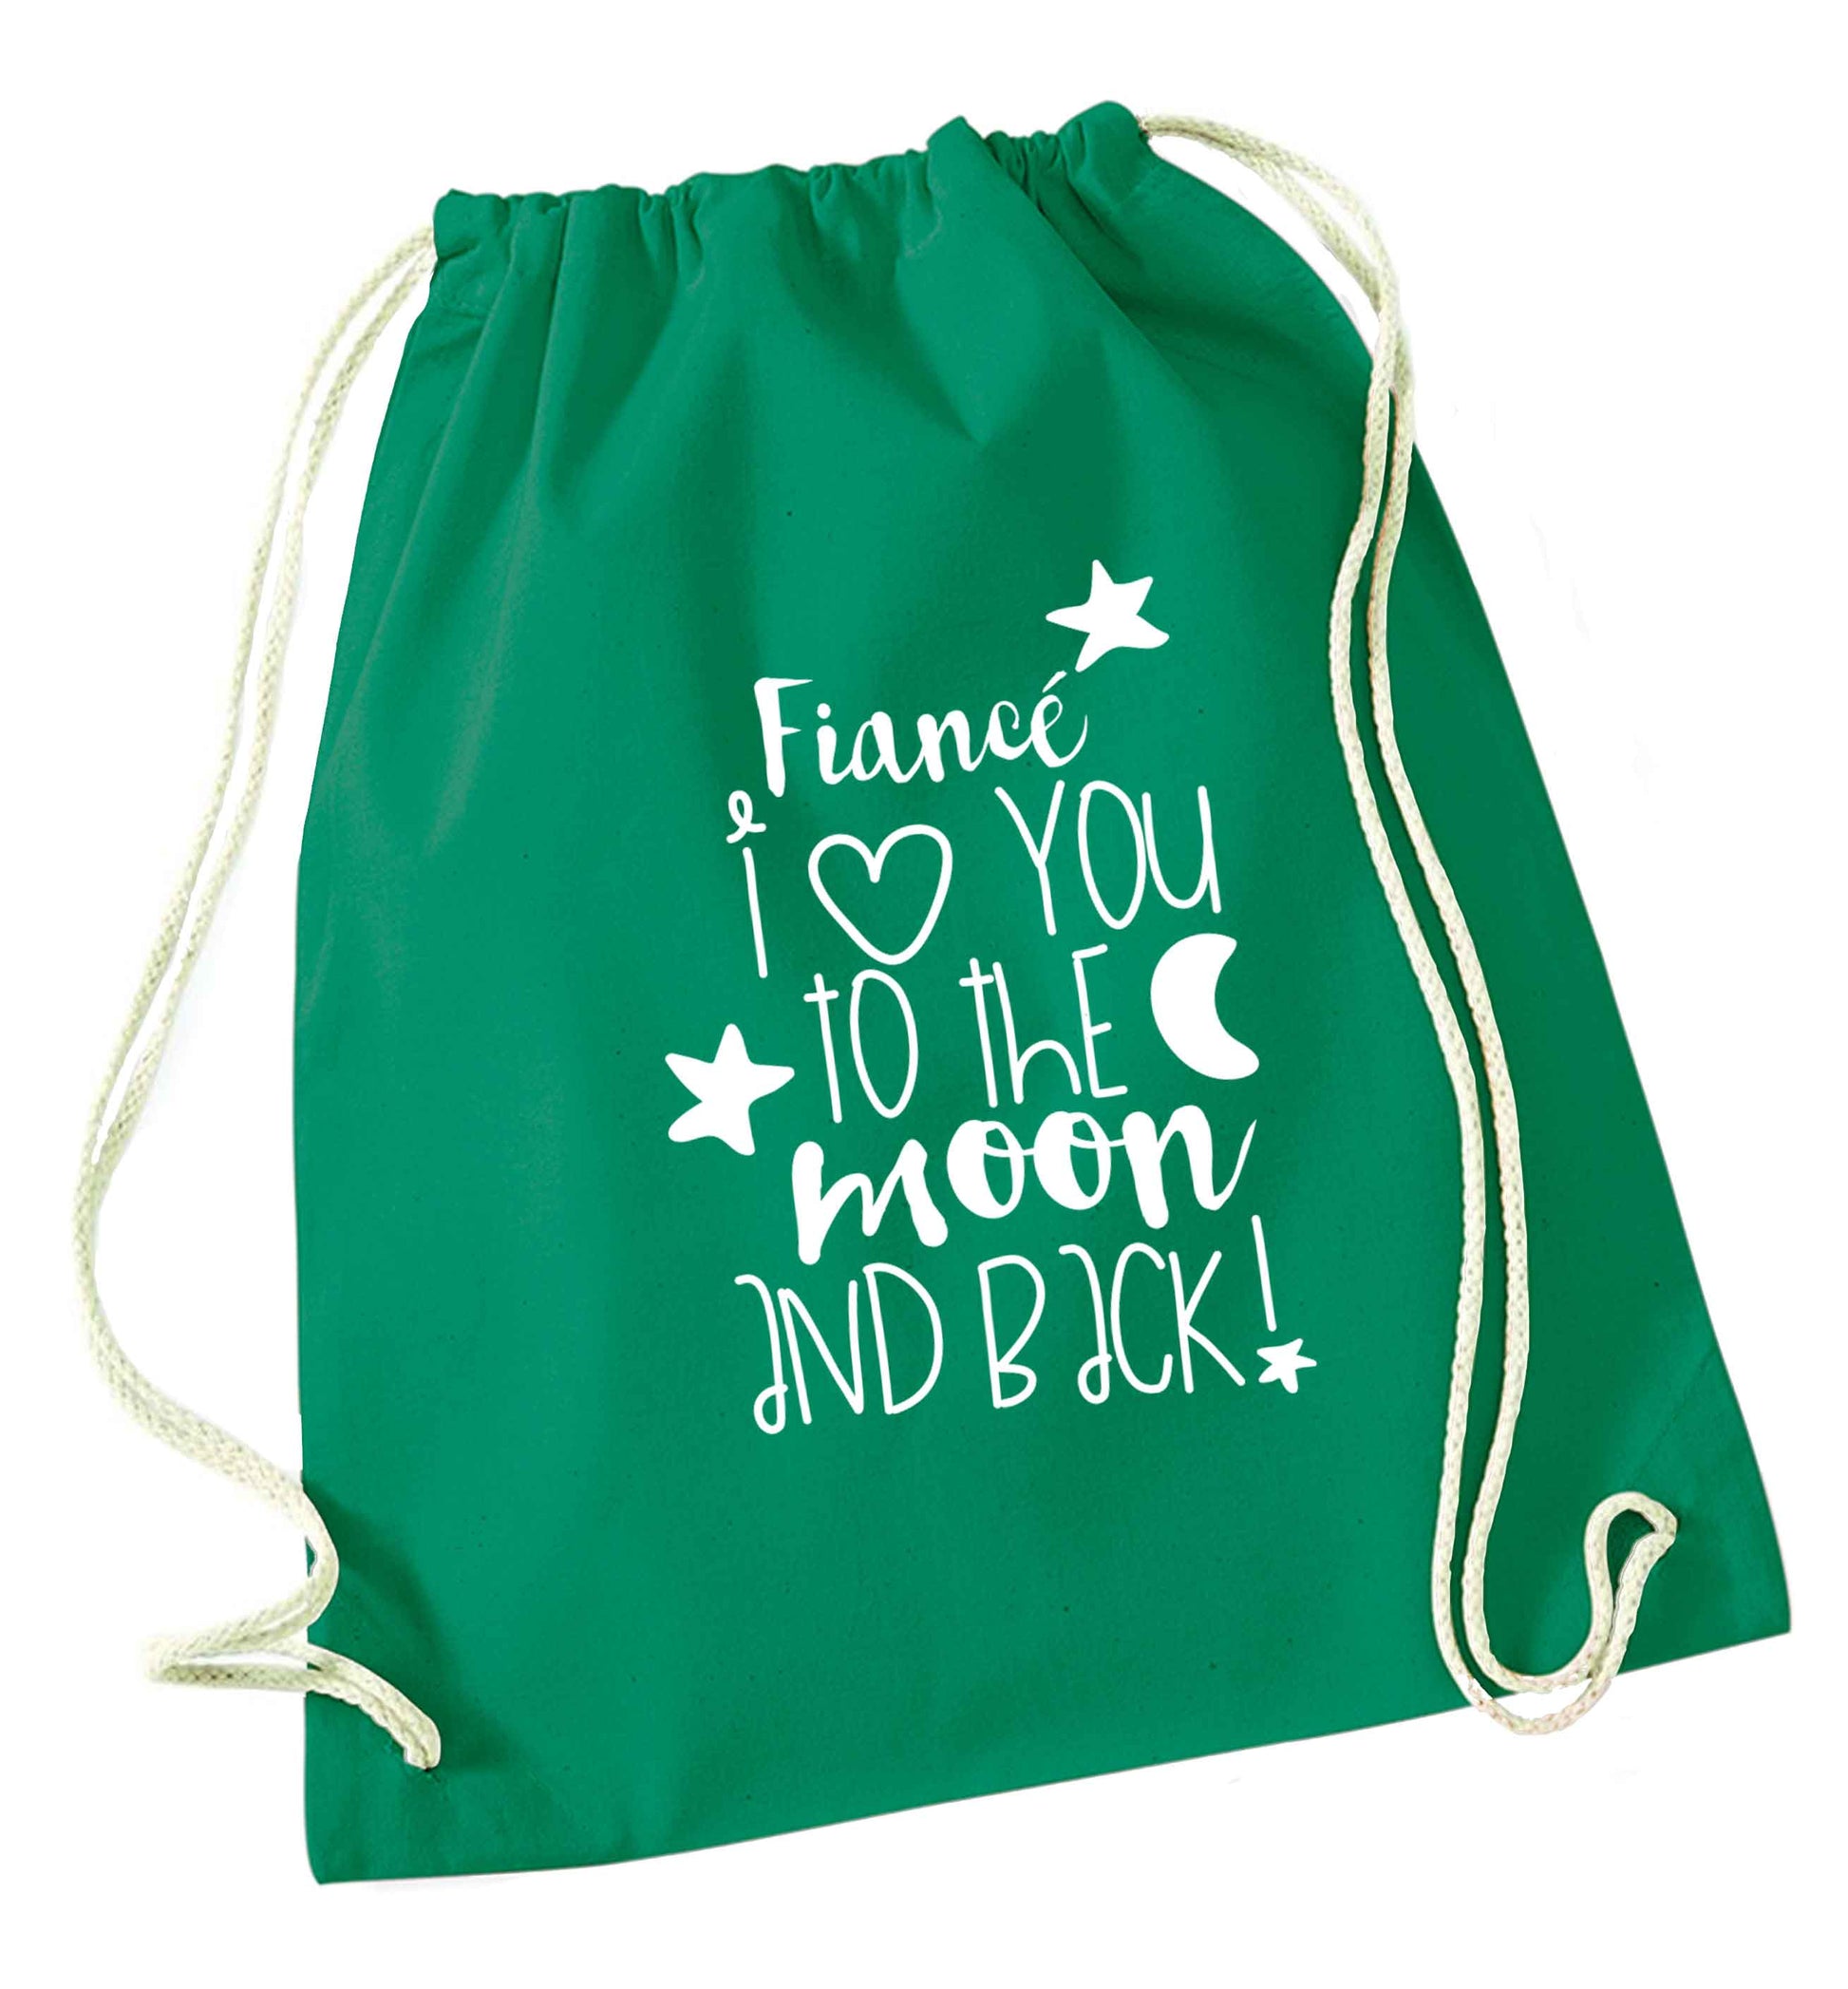 Fiancé I love you to the moon and back - drawstring bag